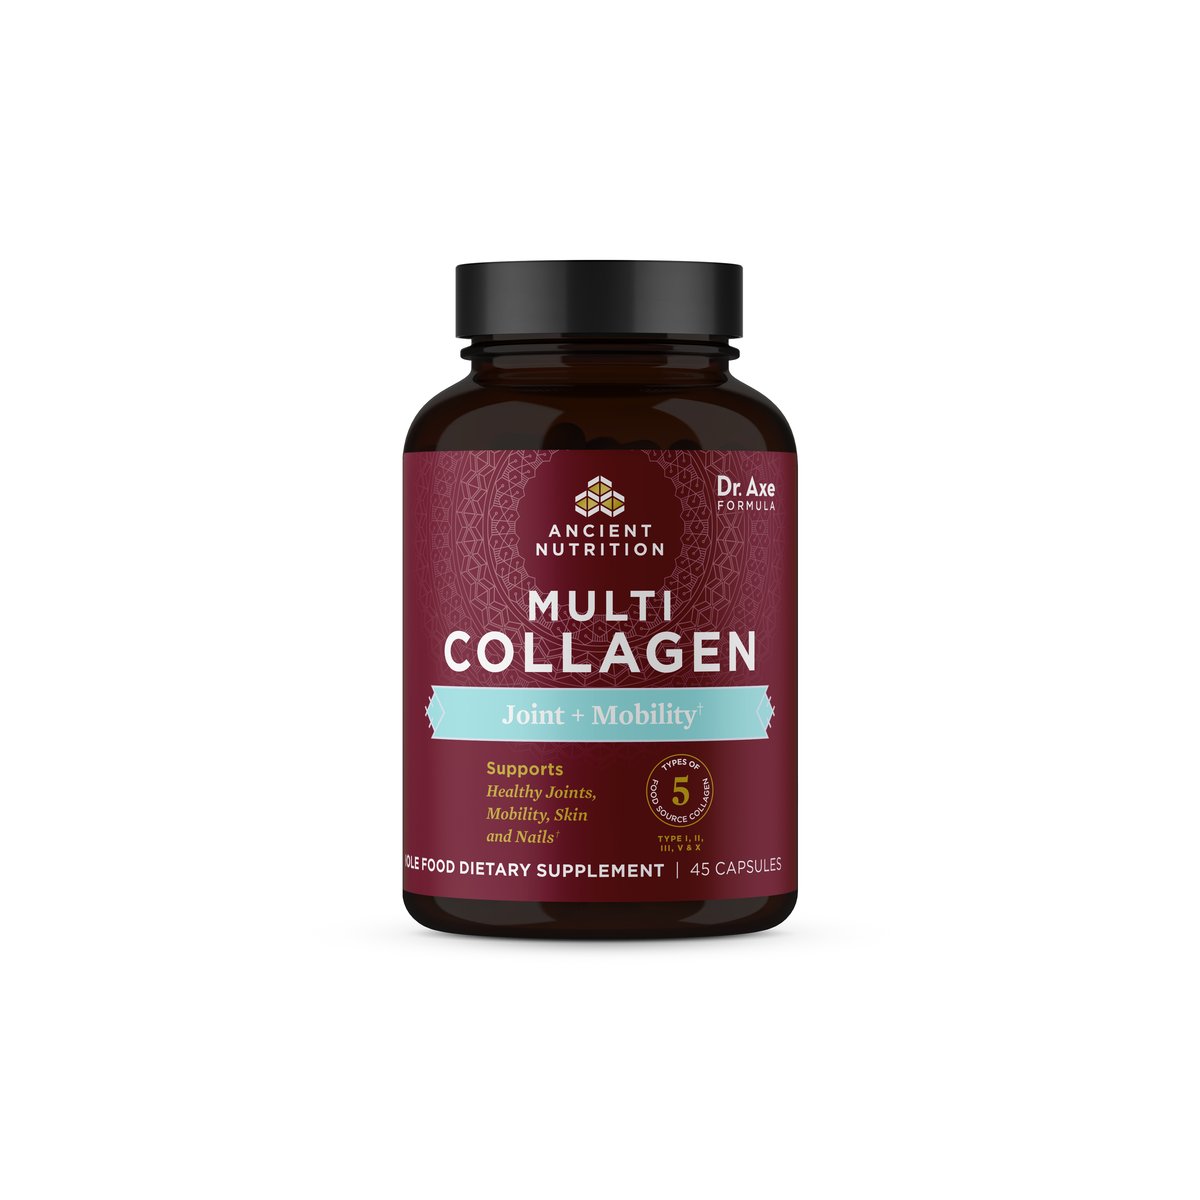 Multi Collagen Capsules - Joint + Mobility 90 Capsules